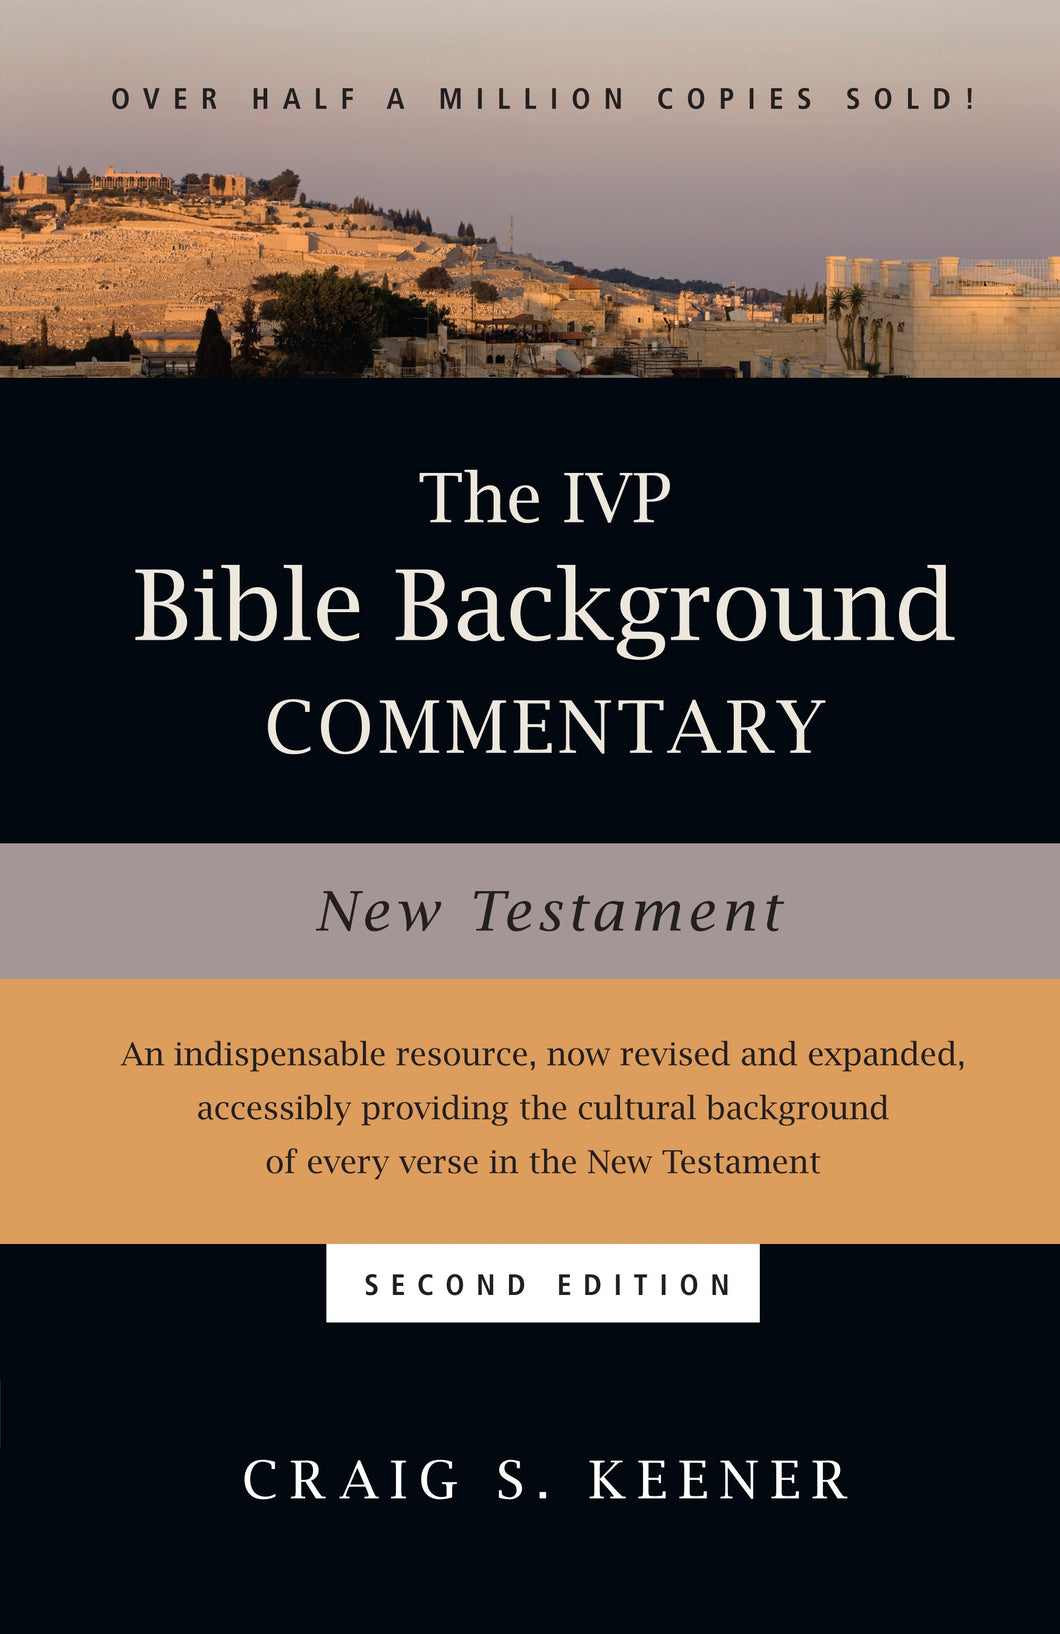 The IVP Bible Background Commentary New Testament (Second Edition)